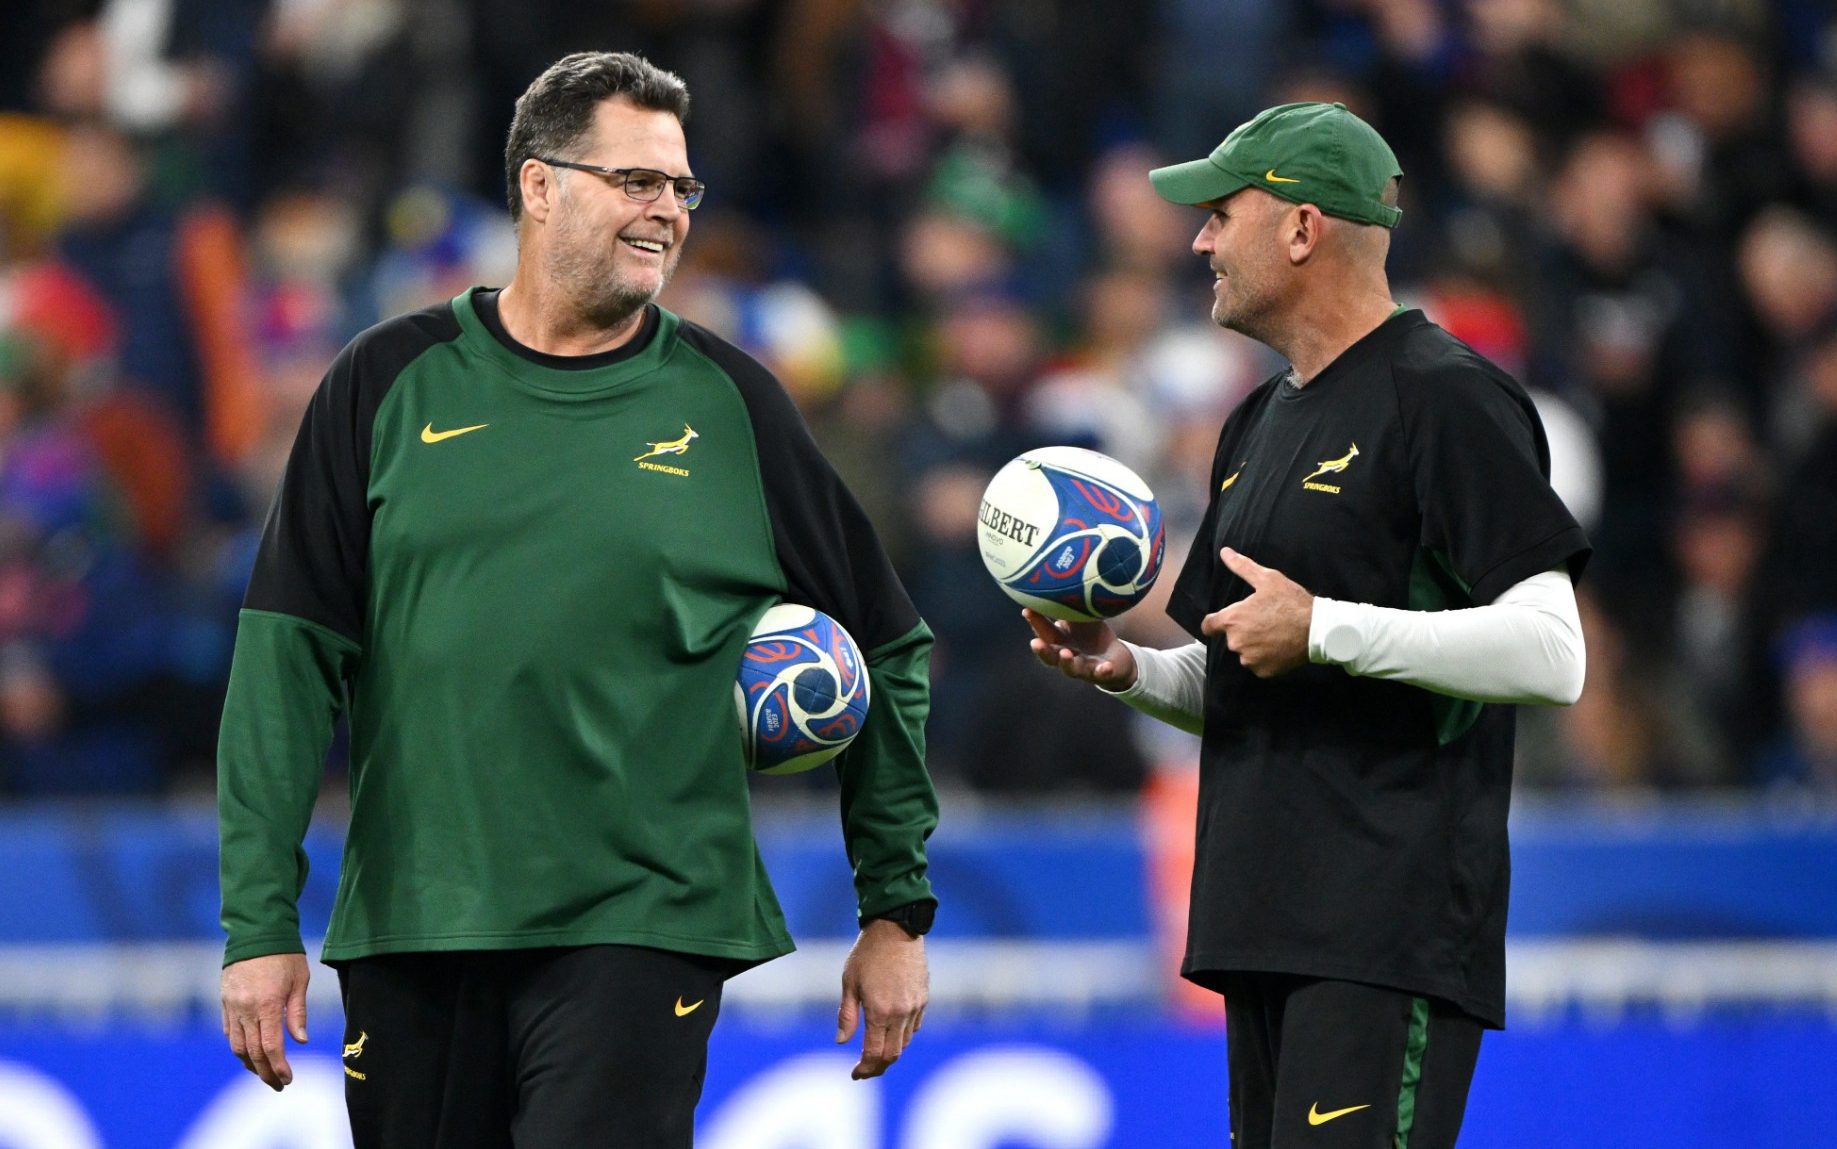 South African rugby coaches, Springboks Rassie Erasmus x Jacques Nienaber